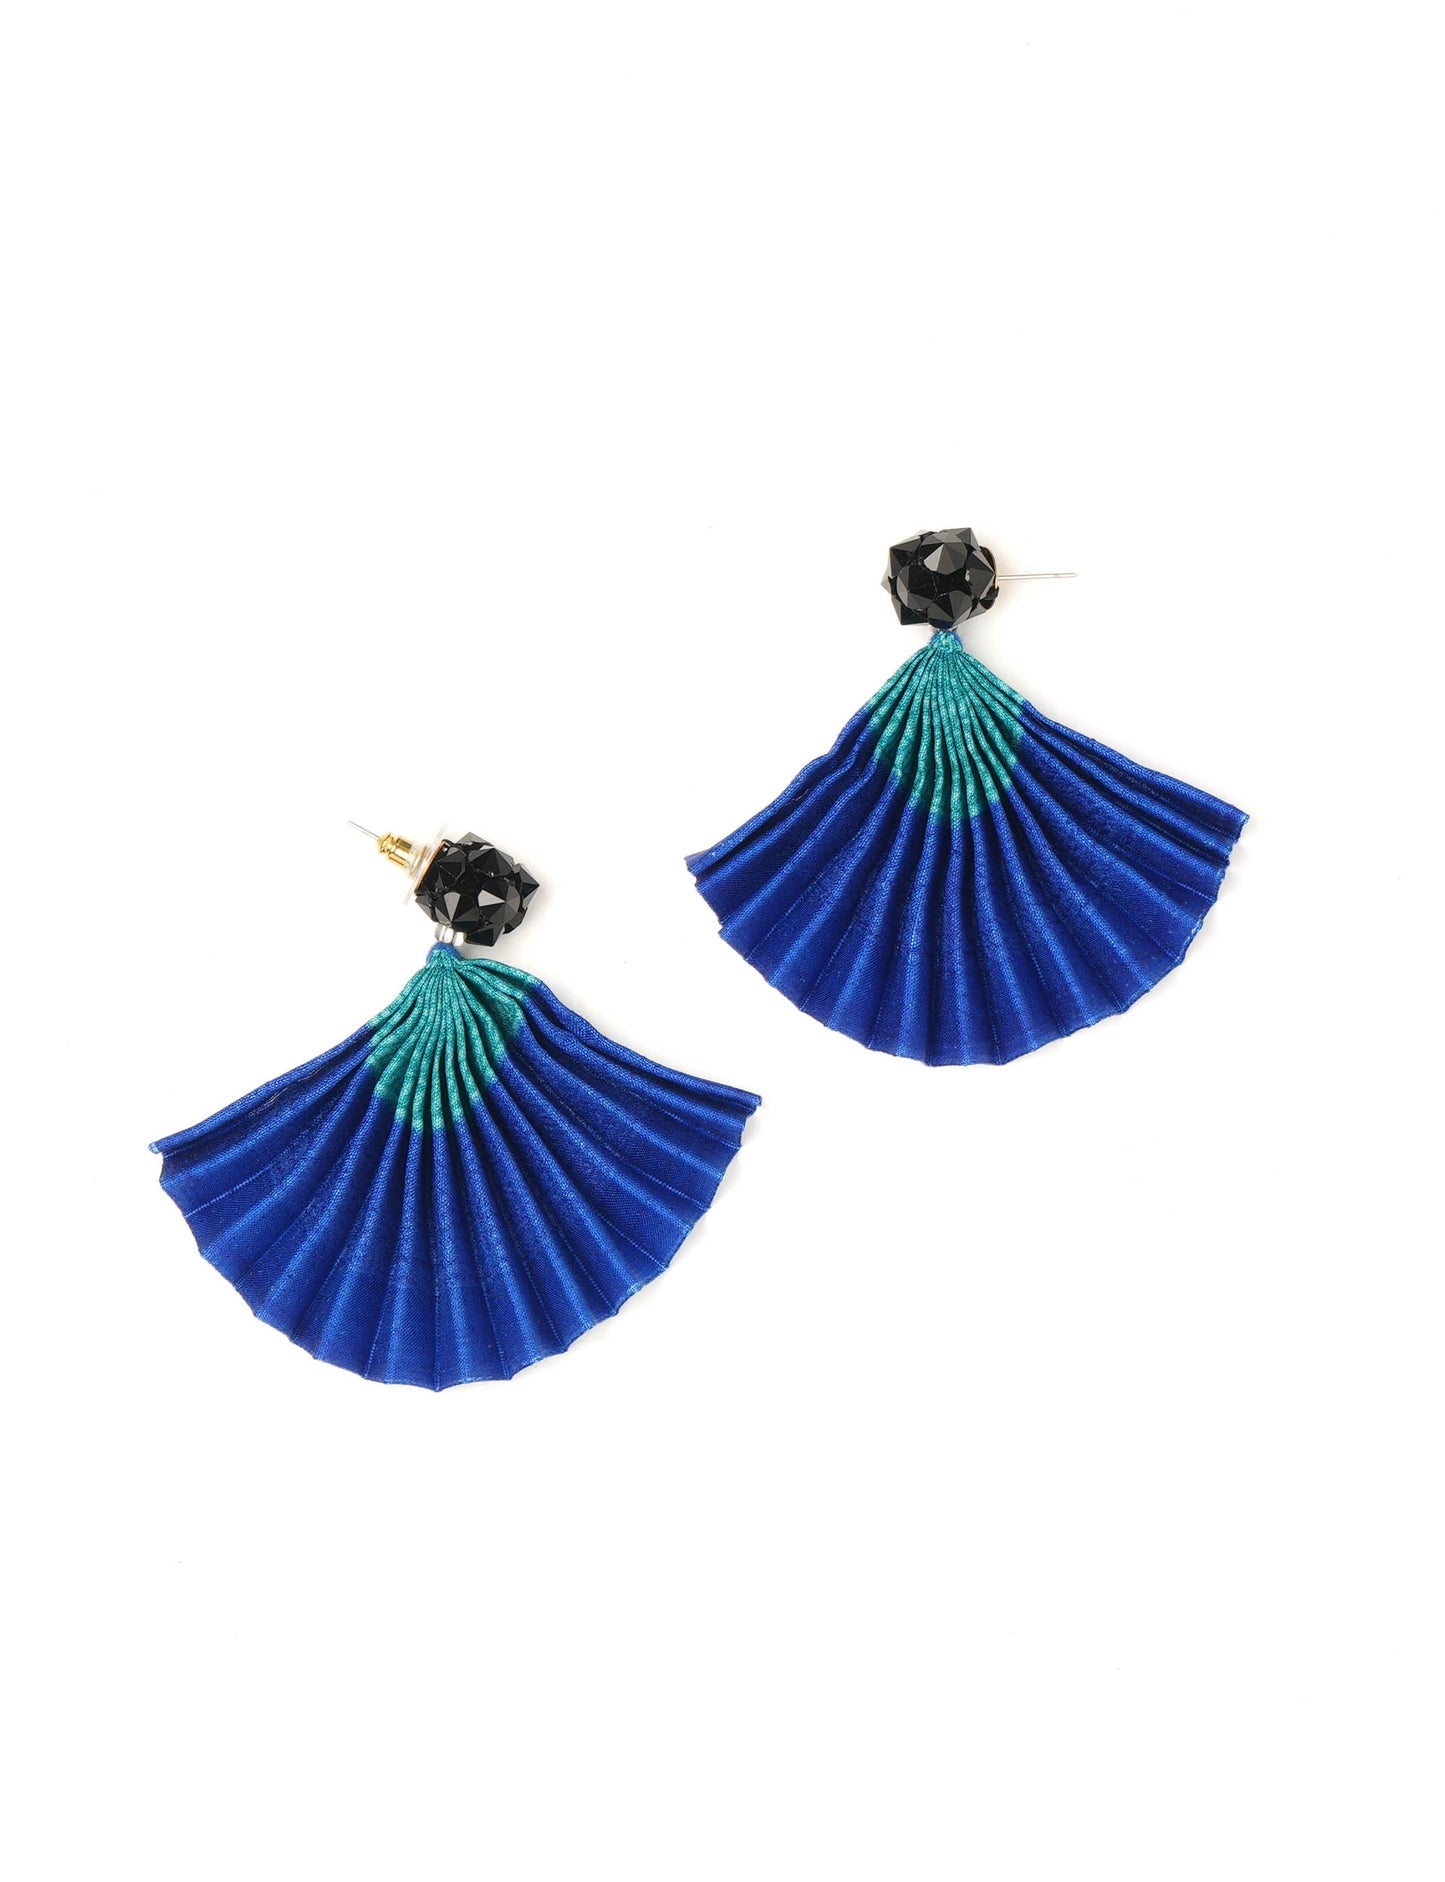 Elevate your style sustainably with our PLEATED EARRINGS – a harmonious blend of ethical fashion and eco-conscious design. Fashioned using innovative heat setting techniques on pre-loved Indian saris, these accessories showcase a commitment to slow fashion and upcycled fashion. Enjoy planet-friendly charm with hypoallergy tested metal hooks, nickel, and lead-free for a skin-friendly touch.